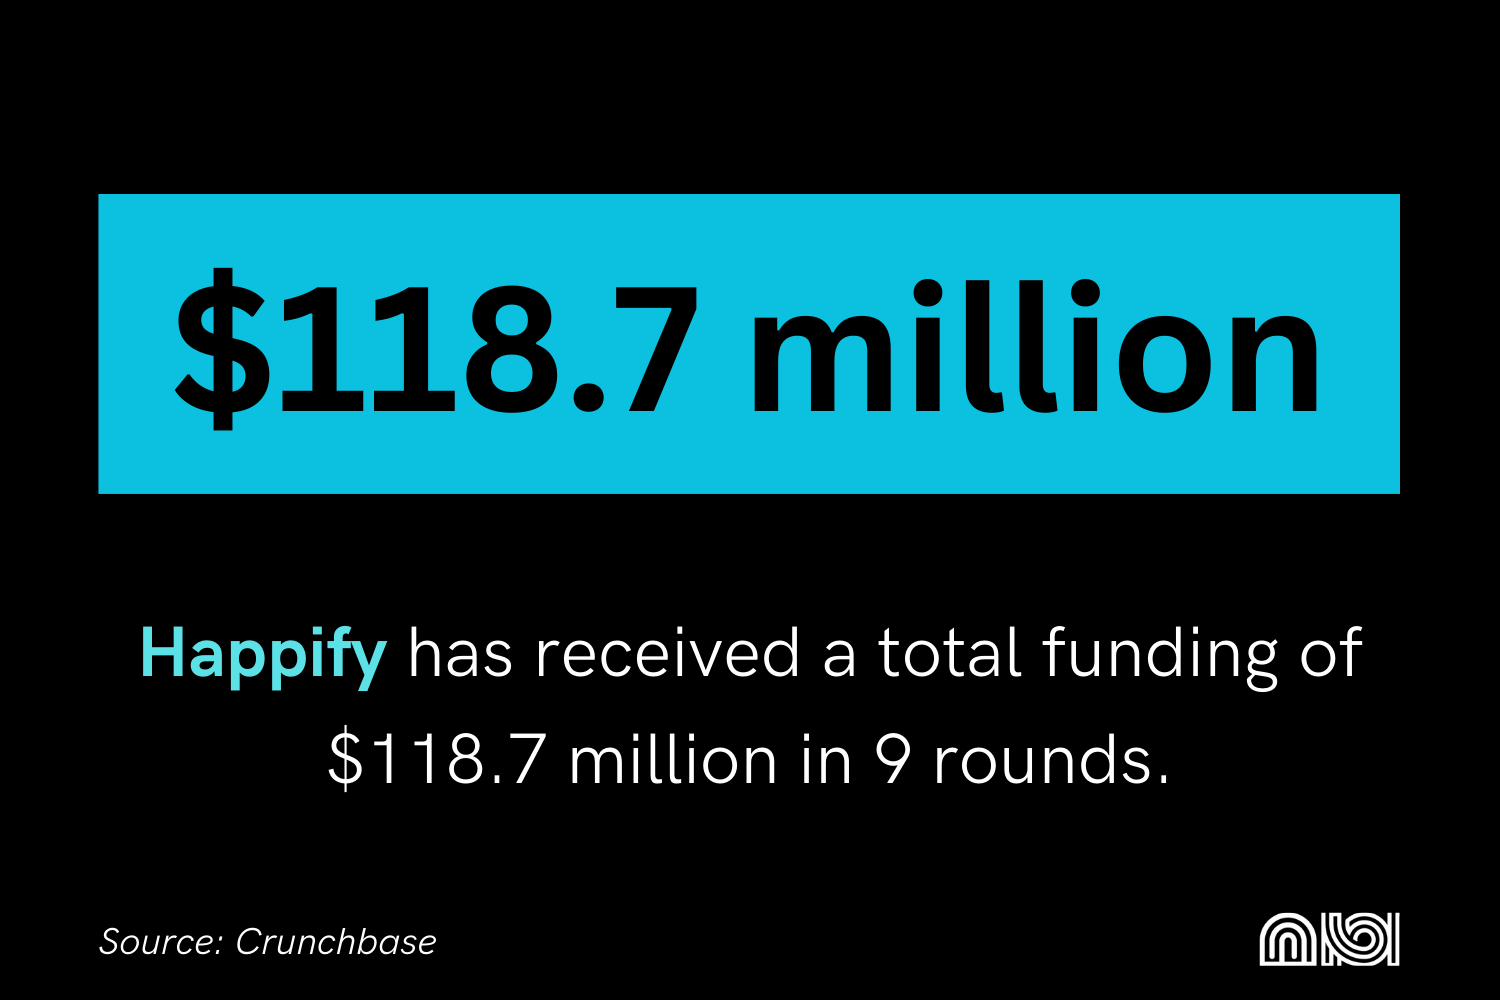 Happify app secures $118.7M funding across 9 rounds for enhancing emotional well-being. Data from Crunchbase.